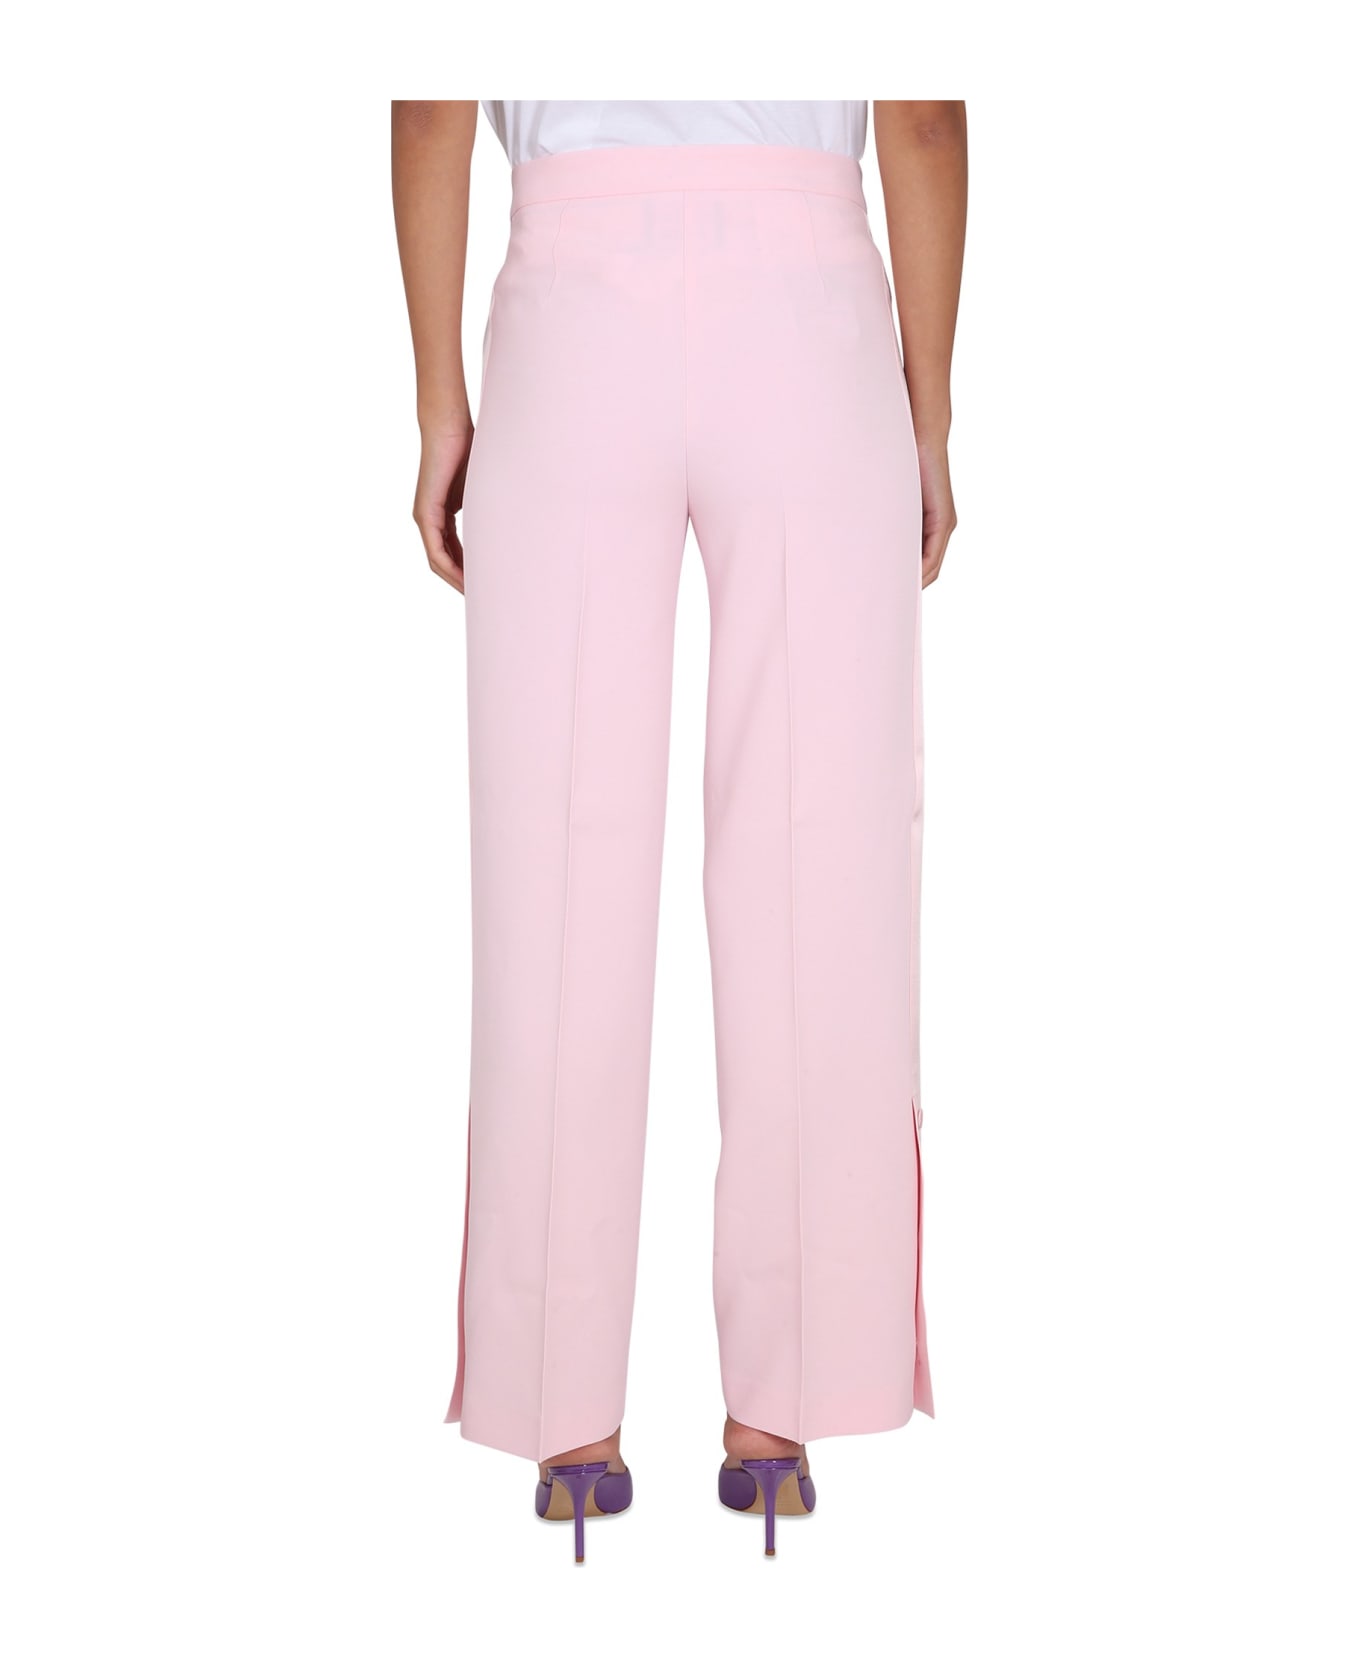 Boutique Moschino Pants With Buttons - ROSA